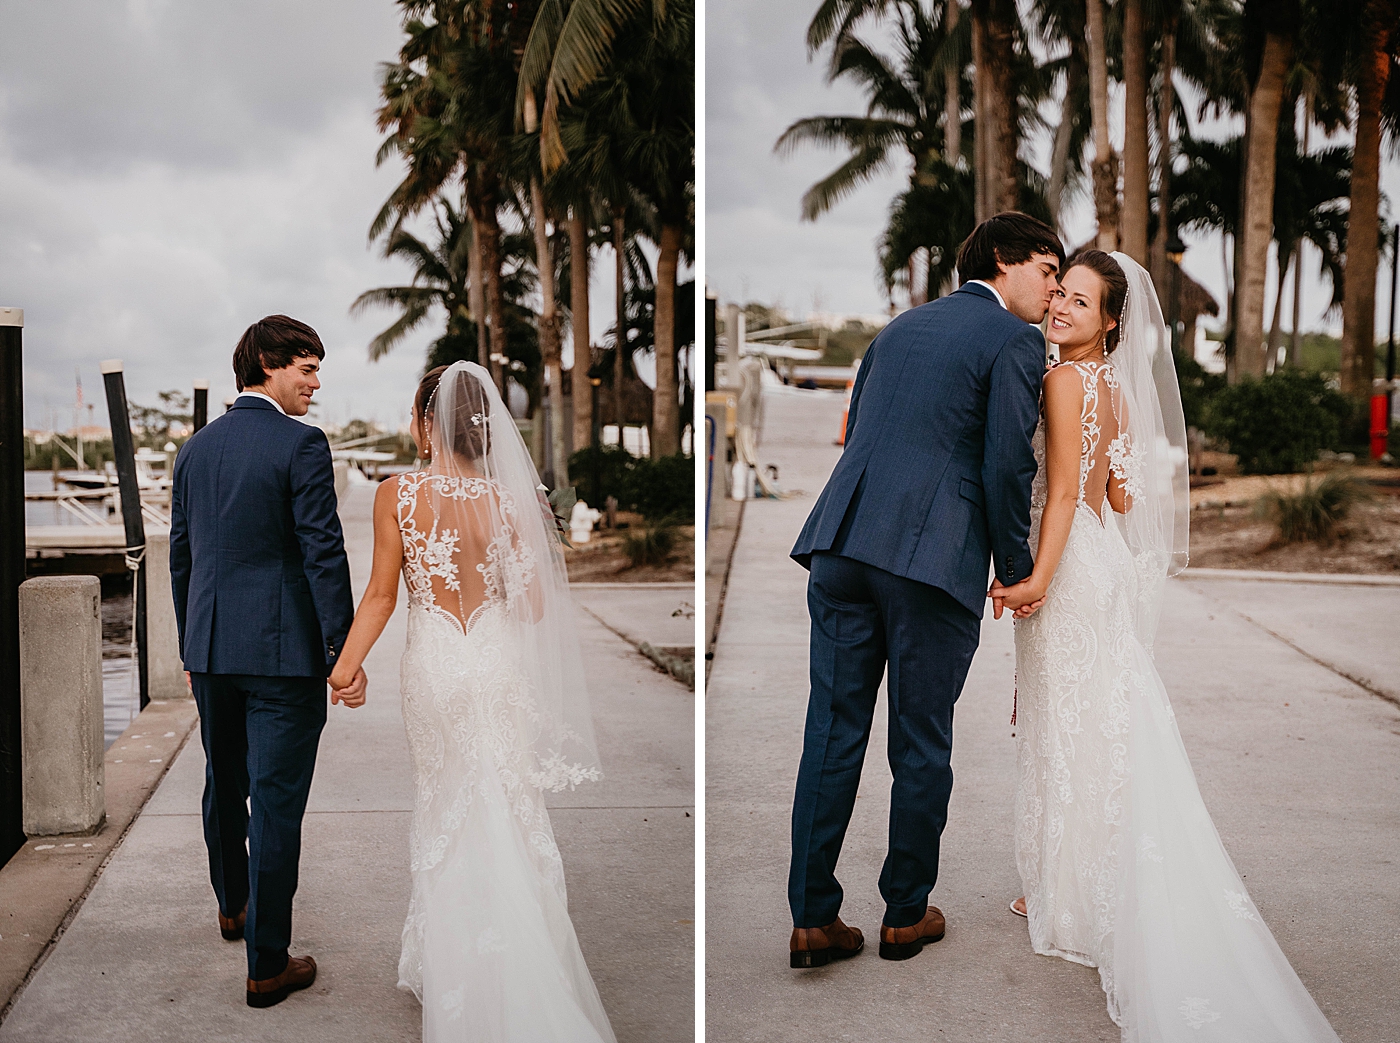 Bride and Groom holding hands and walking together Out of the Blue Celebrations Wedding Photography captured by South Florida Wedding Photographer Krystal Capone Photography 